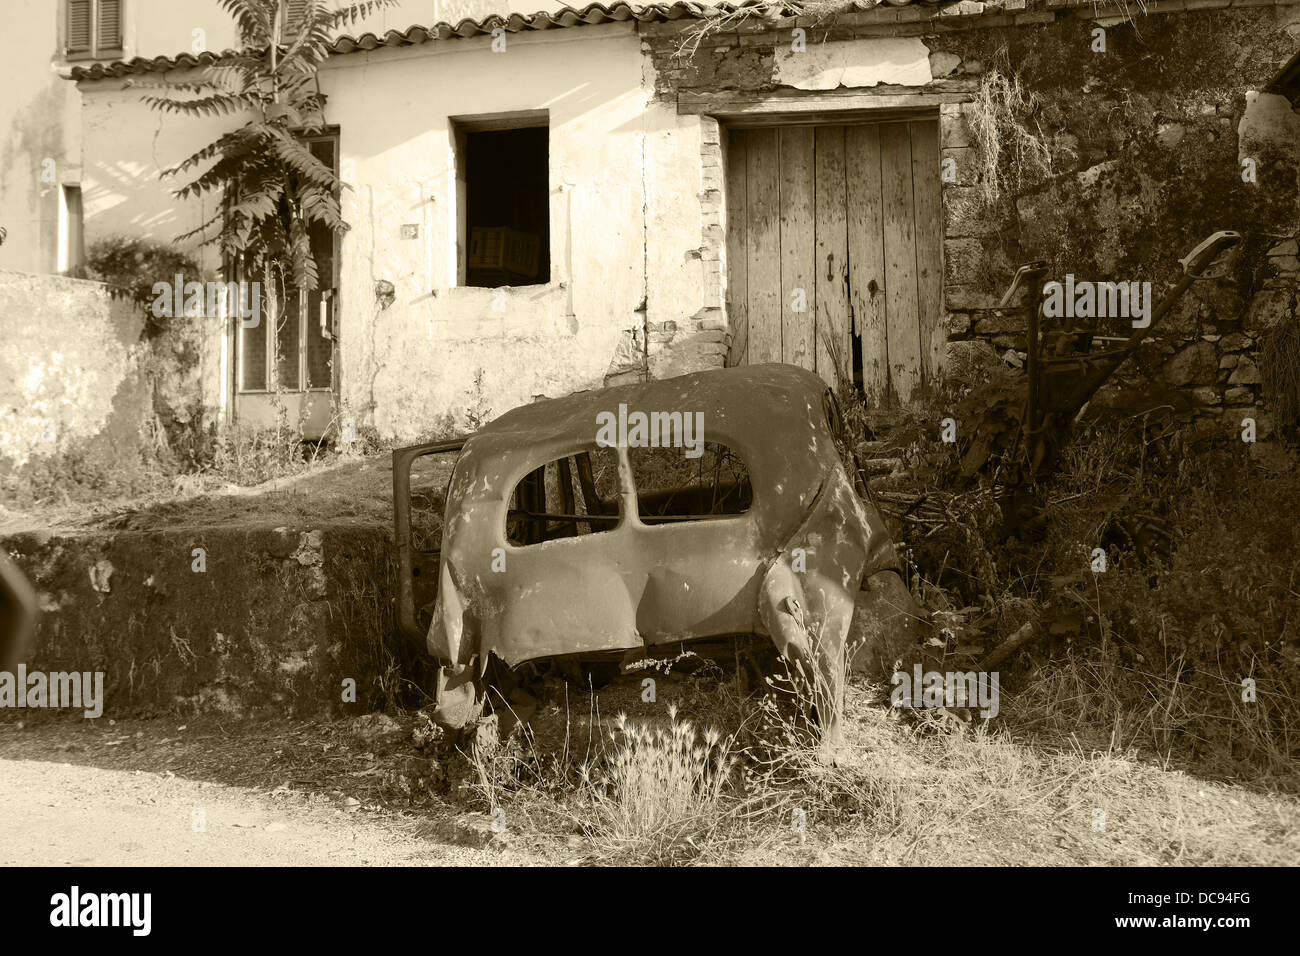 Greek Car High Resolution Stock Photography and Images - Alamy